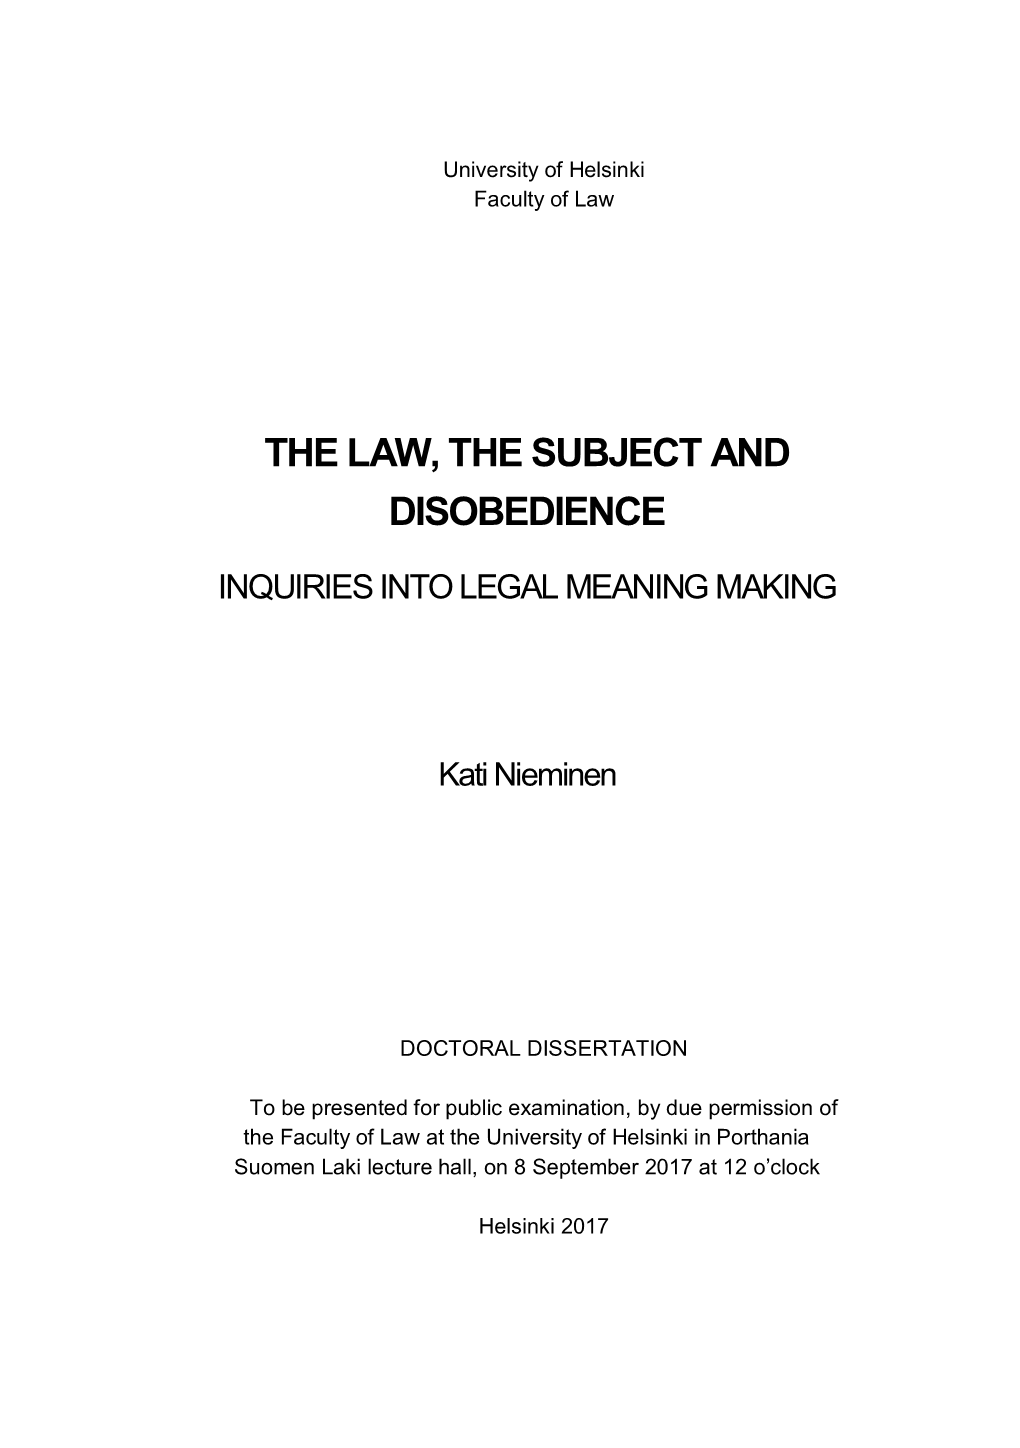 The Law, the Subject and Disobedience Inquiries Into